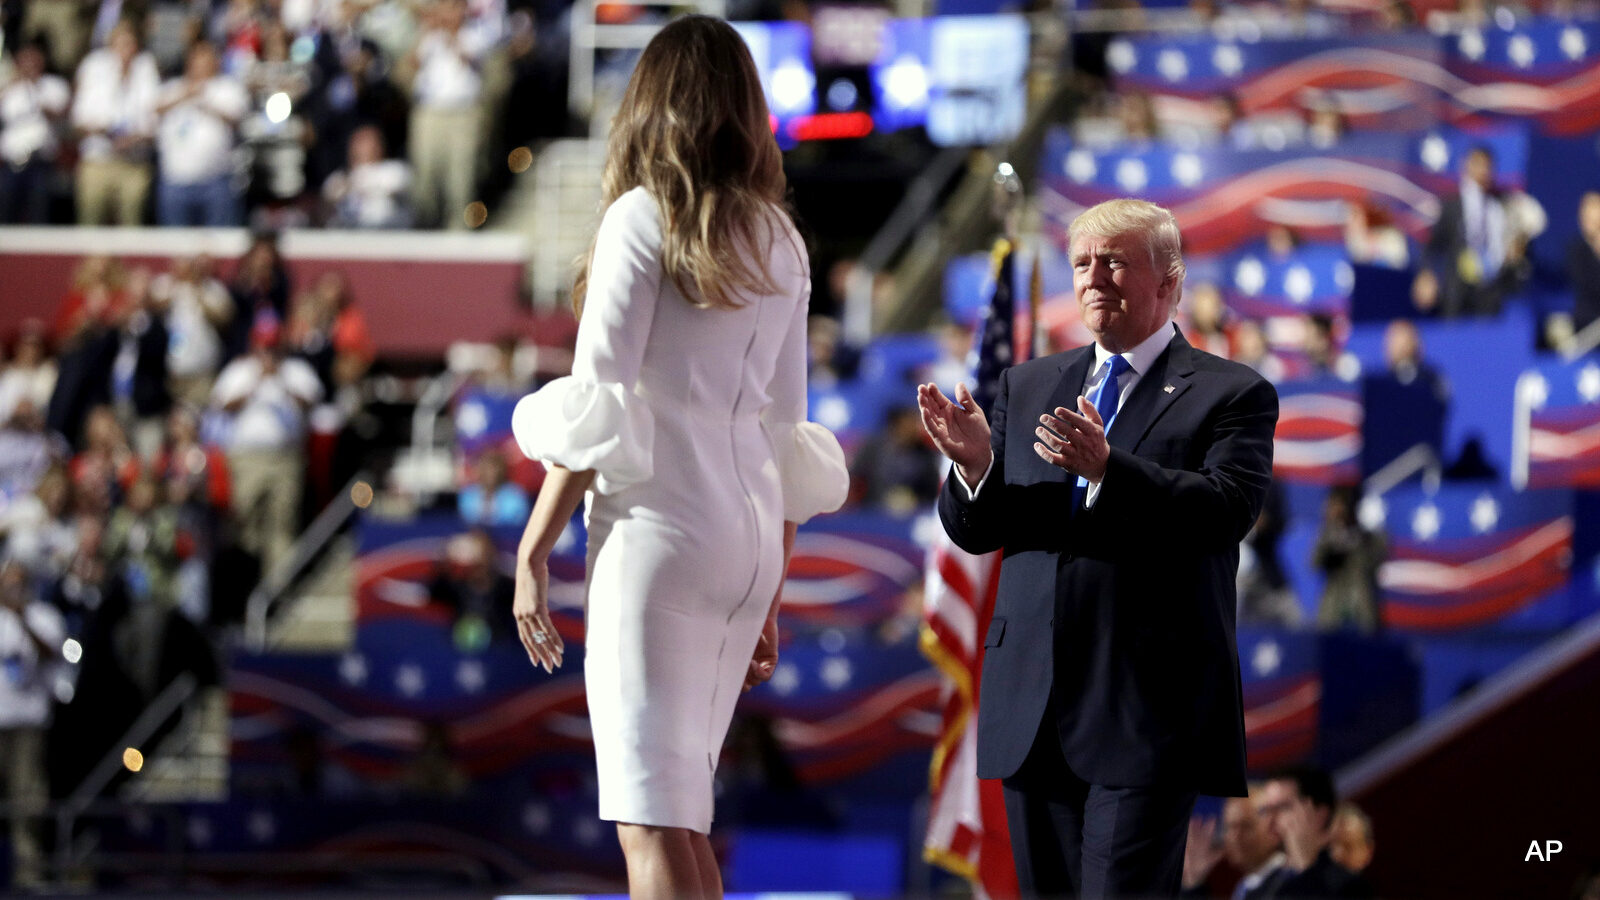 Republican presidential candidate Donald Trump applauses after with his wife Melania addresses the delegates during the Republican National Convention, Monday, July 18, 2016, in Cleveland.